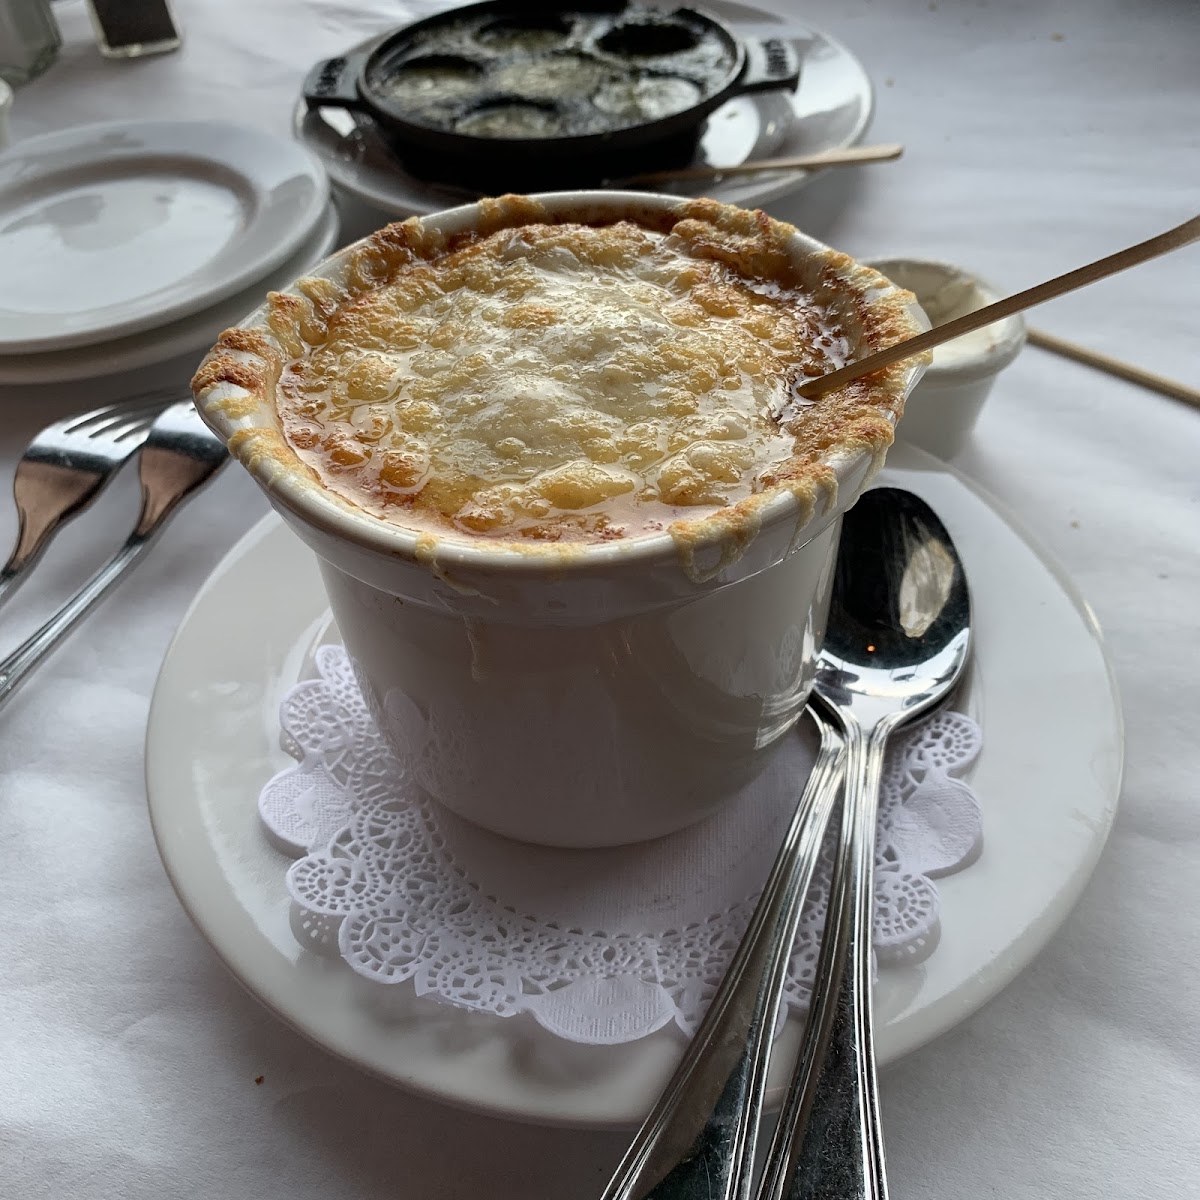 French Onion soup. So good!